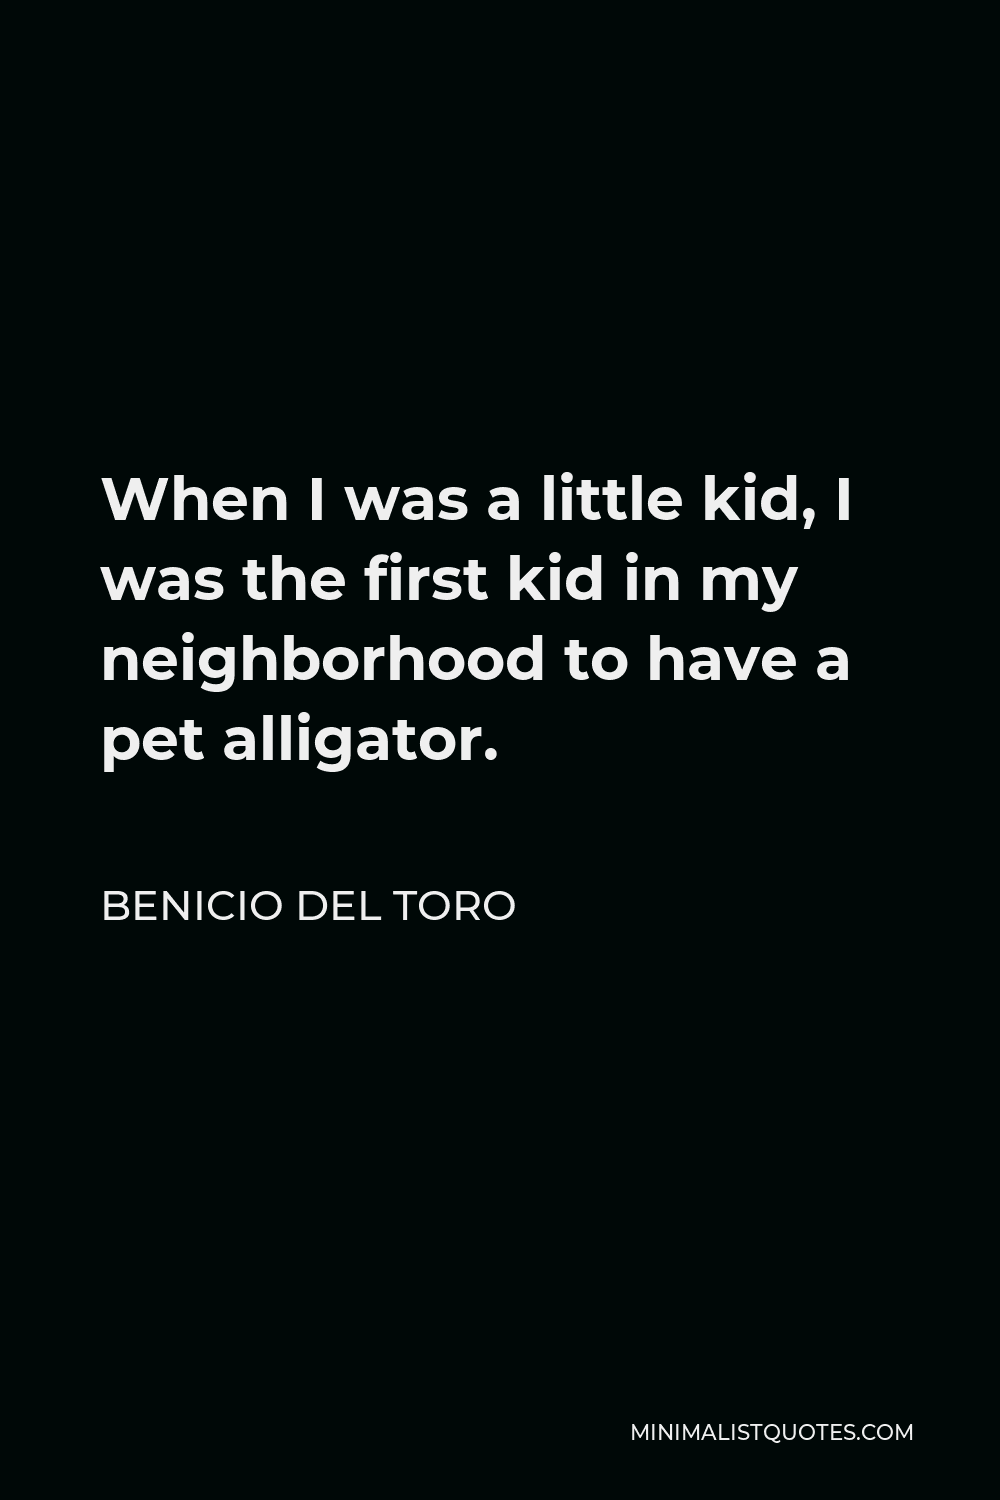 Benicio Del Toro Quote - When I was a little kid, I was the first kid in my neighborhood to have a pet alligator.